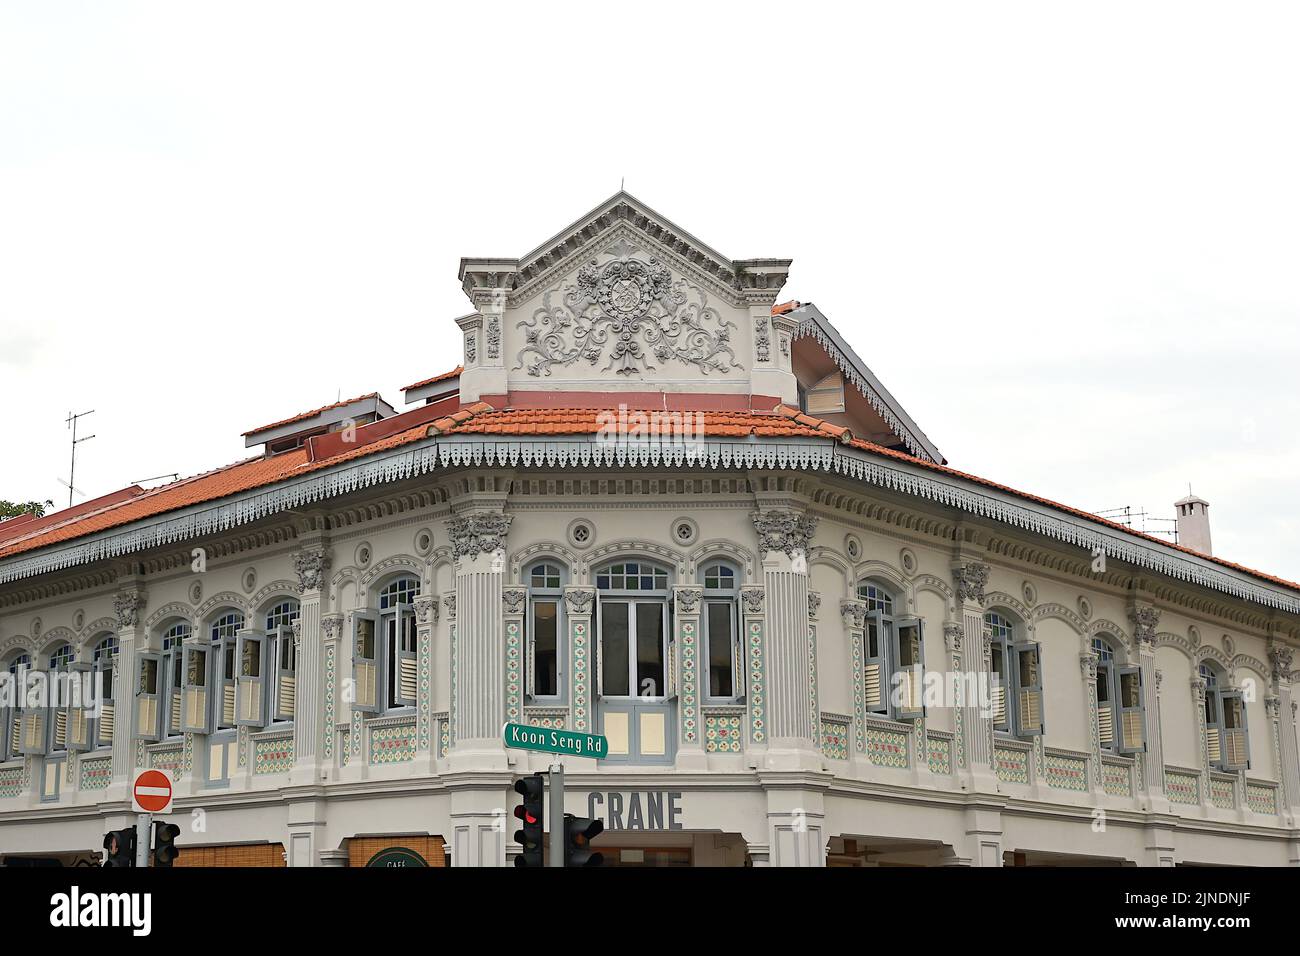 Corner terrace shophouses Joo Chiat Road Singapore, with distinctive Straits Chinese & rococo architecture, QiLin or Chinese unicorns & floral designs Stock Photo